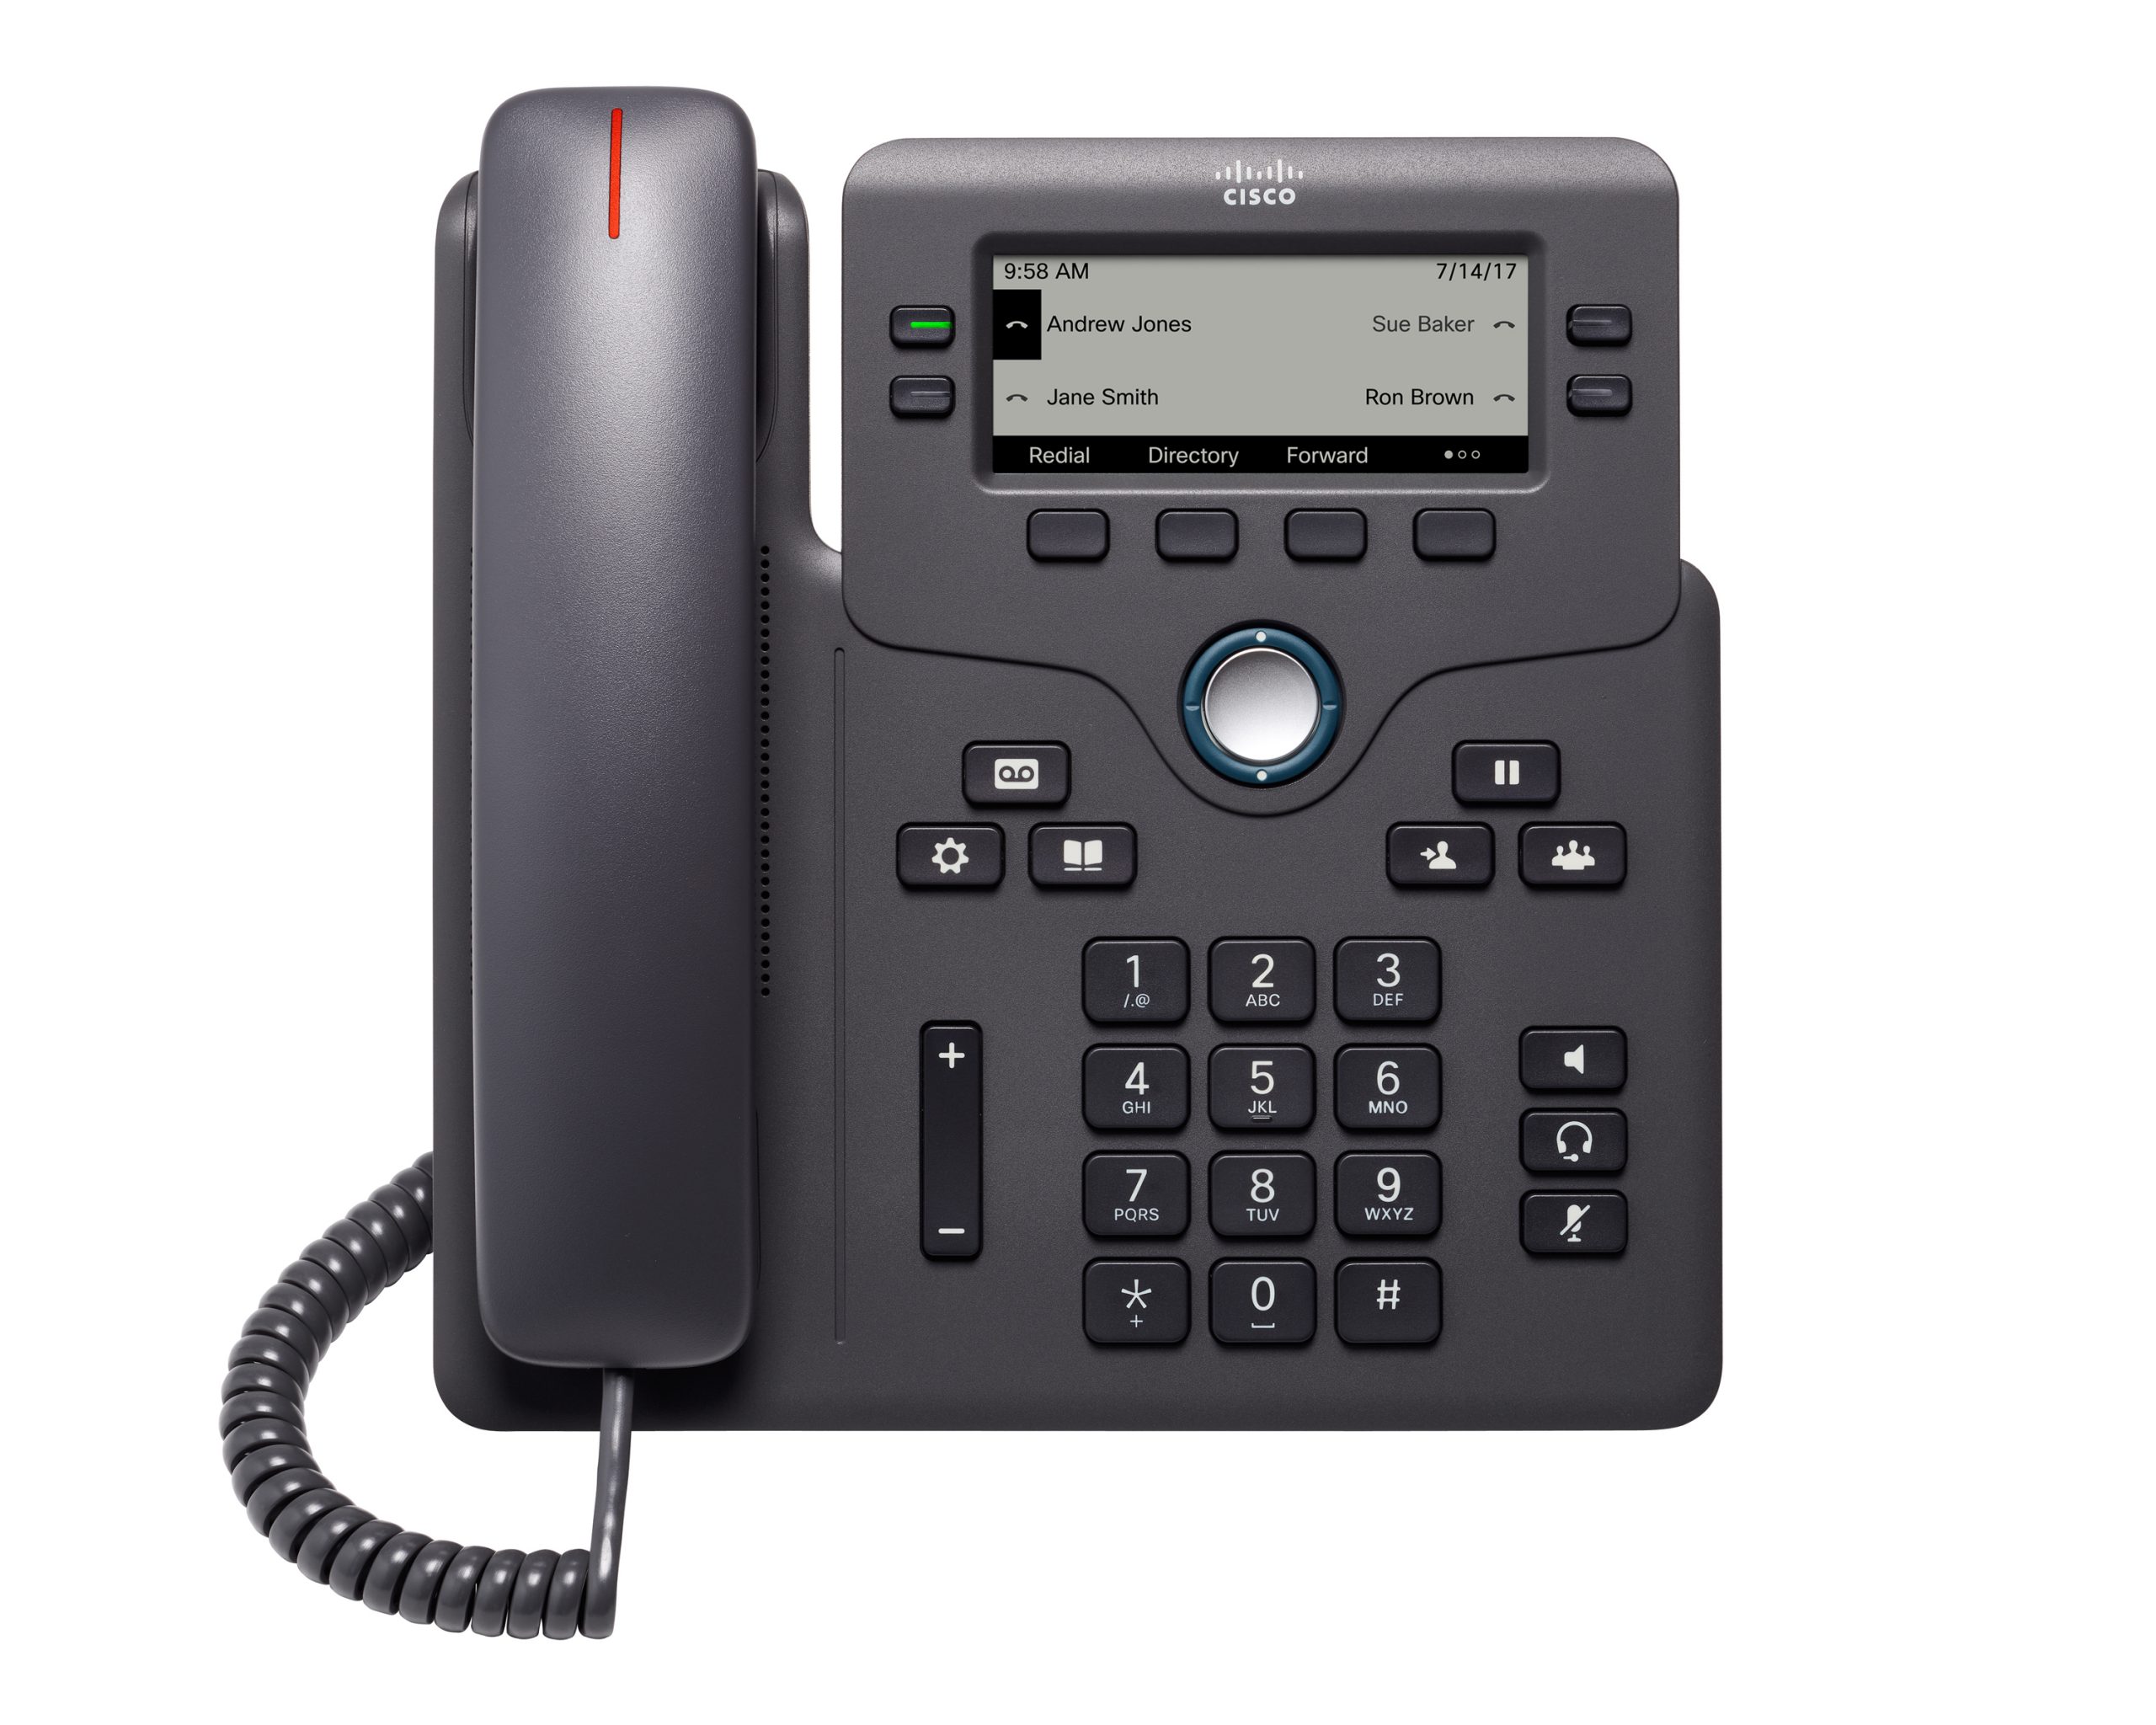 7-13 IT Solutions - VOIP